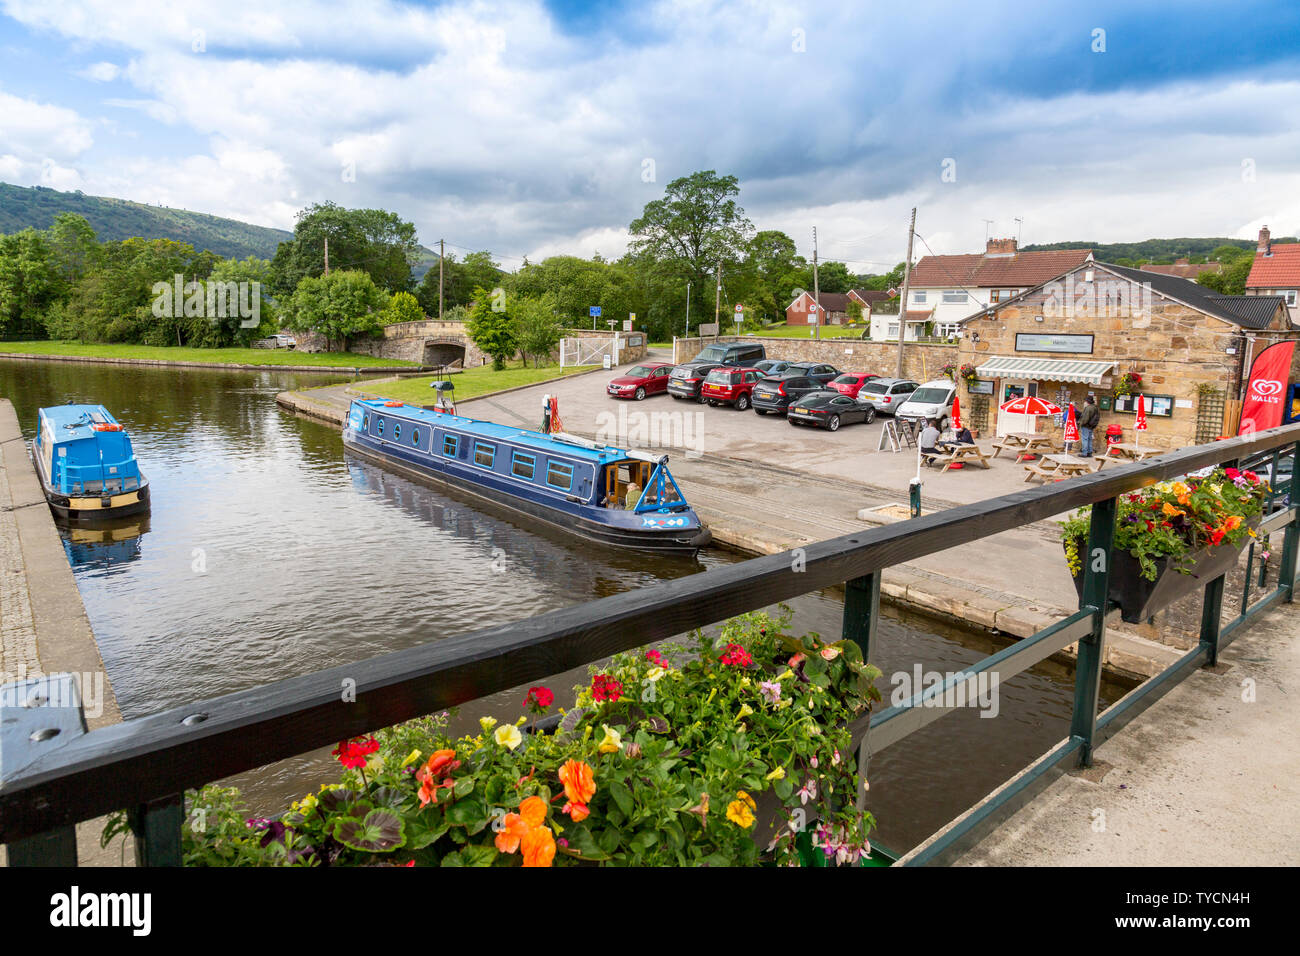 Colourful holiday narrowboats in Trevor Basin on the Llangollen Canal, Clwyd, Wales, UK Stock Photo